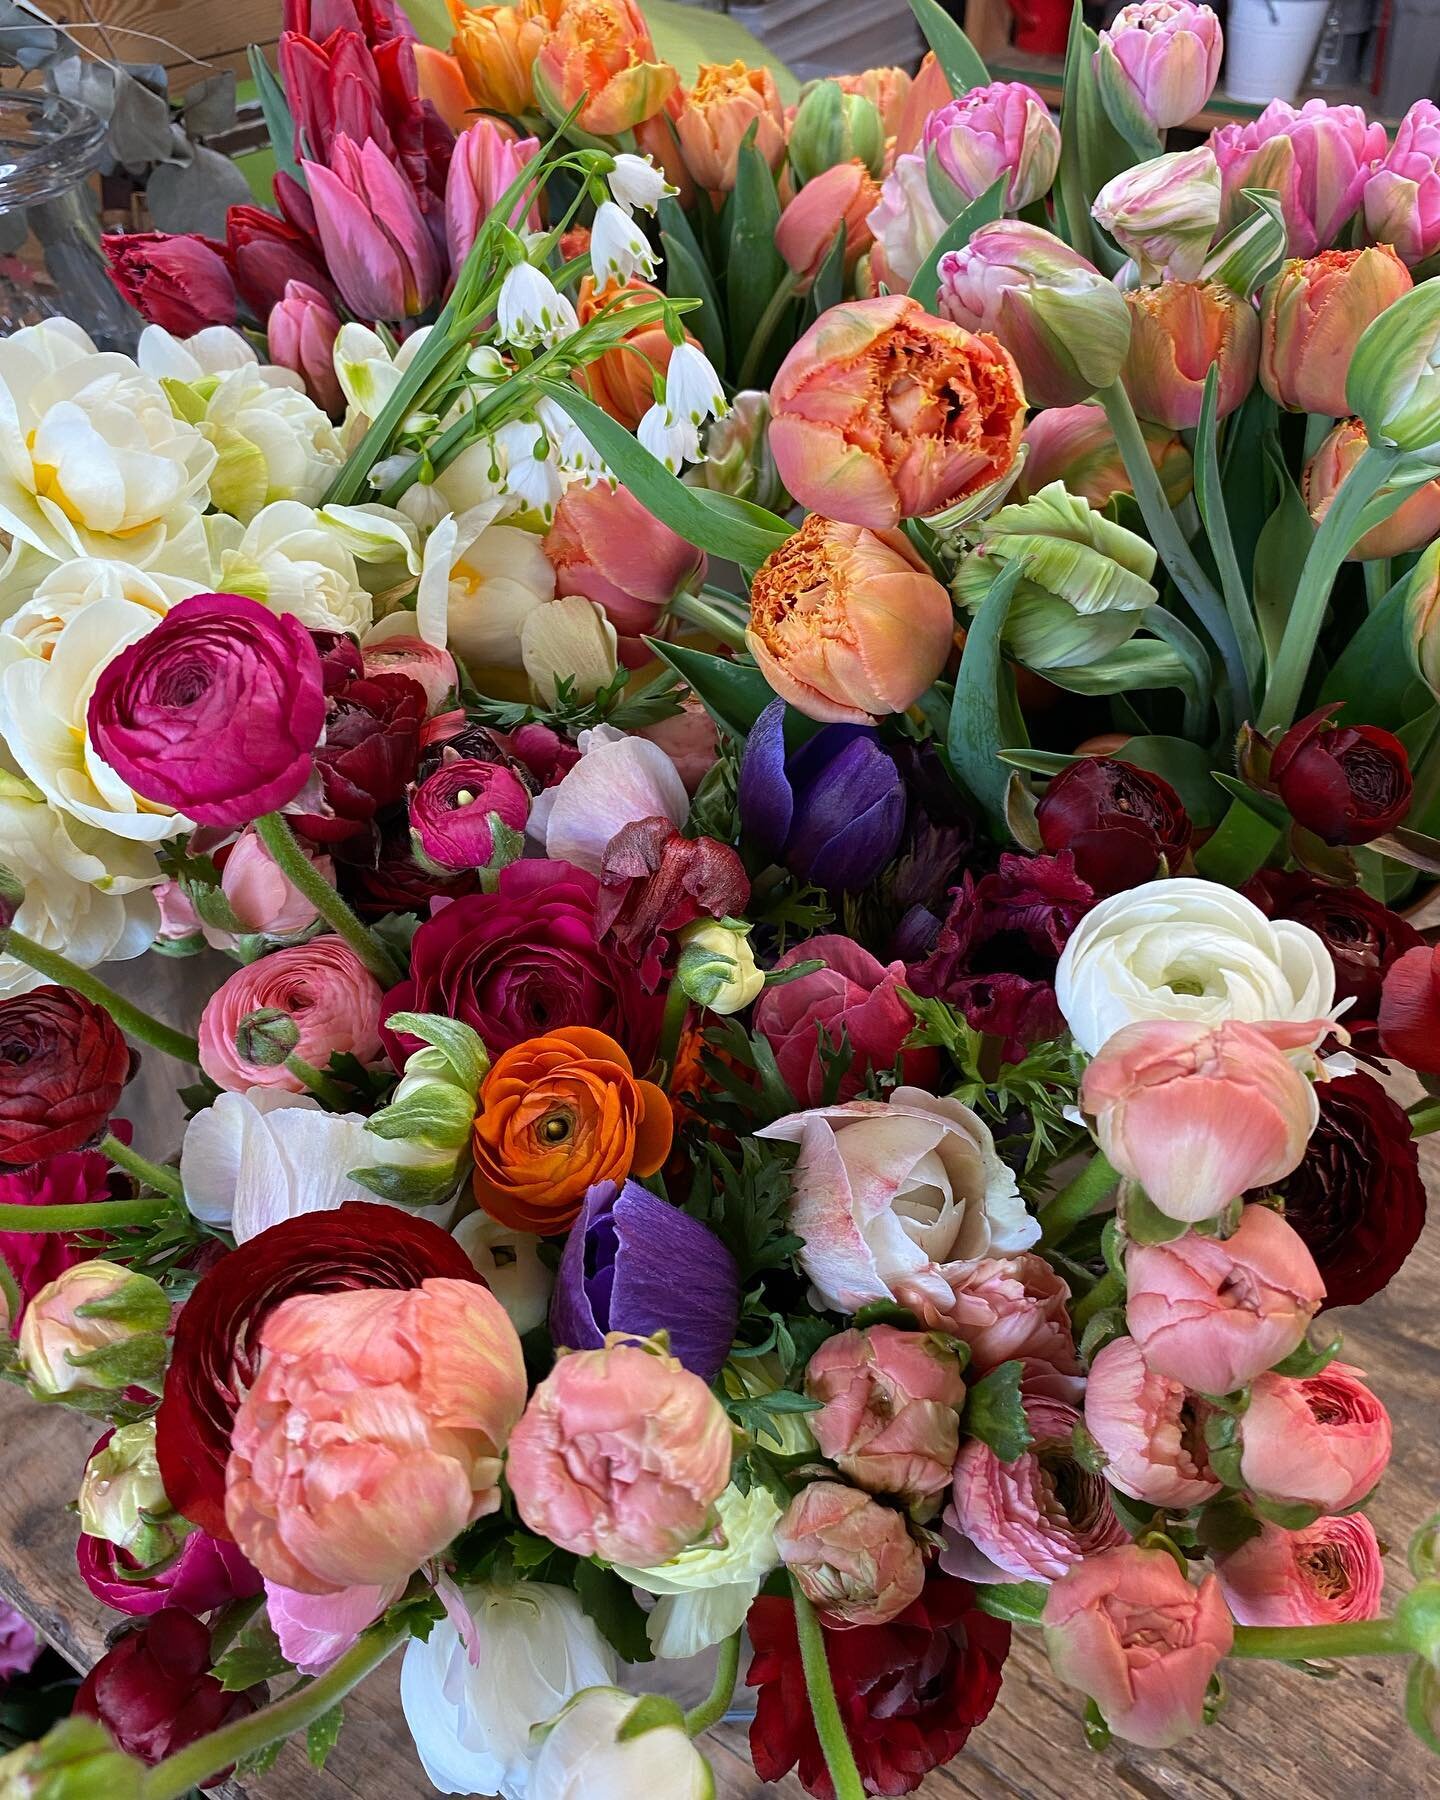 Spring is just a beautiful time.
Harvesting the first blooms, birds are chirping, nurturing the soil and souls as well as planting for a summer flower abundance . Go outside and enjoy the sun!#springtime#springflowers#ranunculus #tulips#lovewhatyoudo